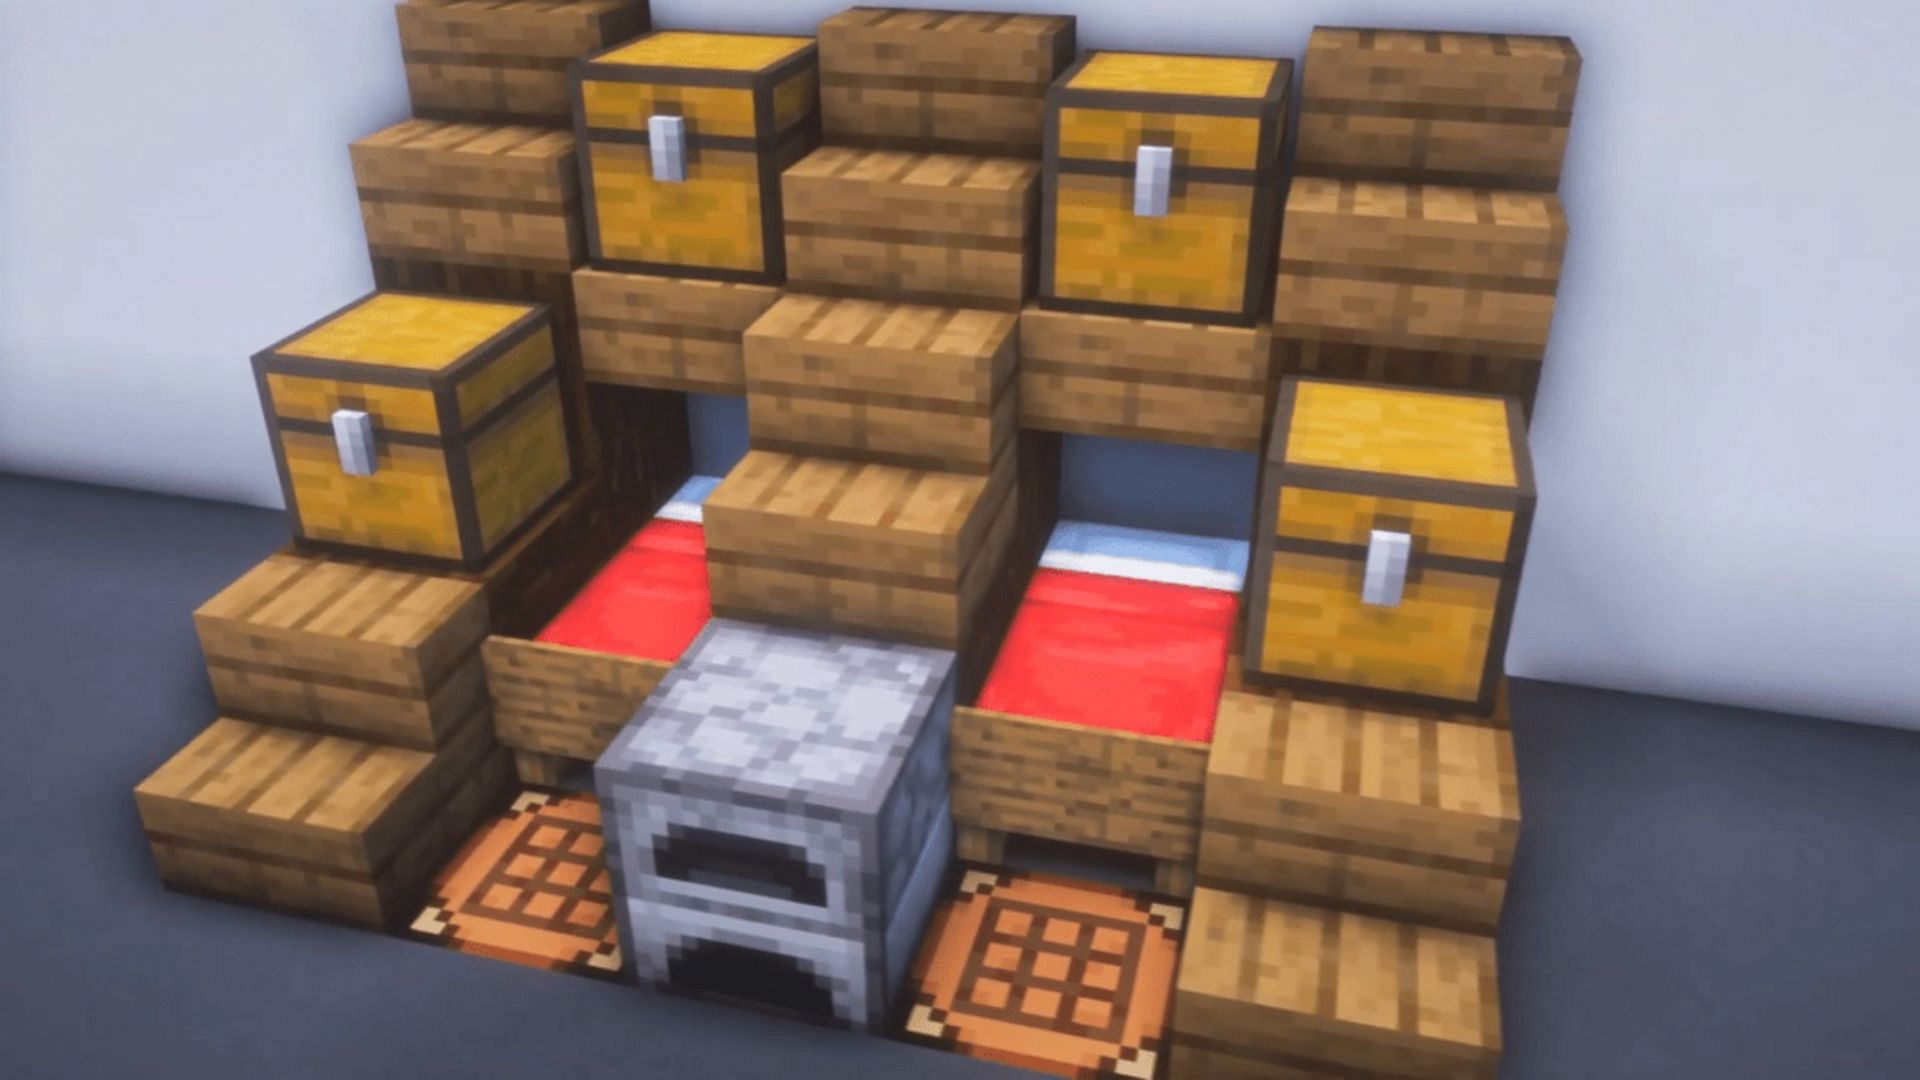 A bed build focused primarily on function over form, complete with storage and working blocks (Image via One Team/YouTube)